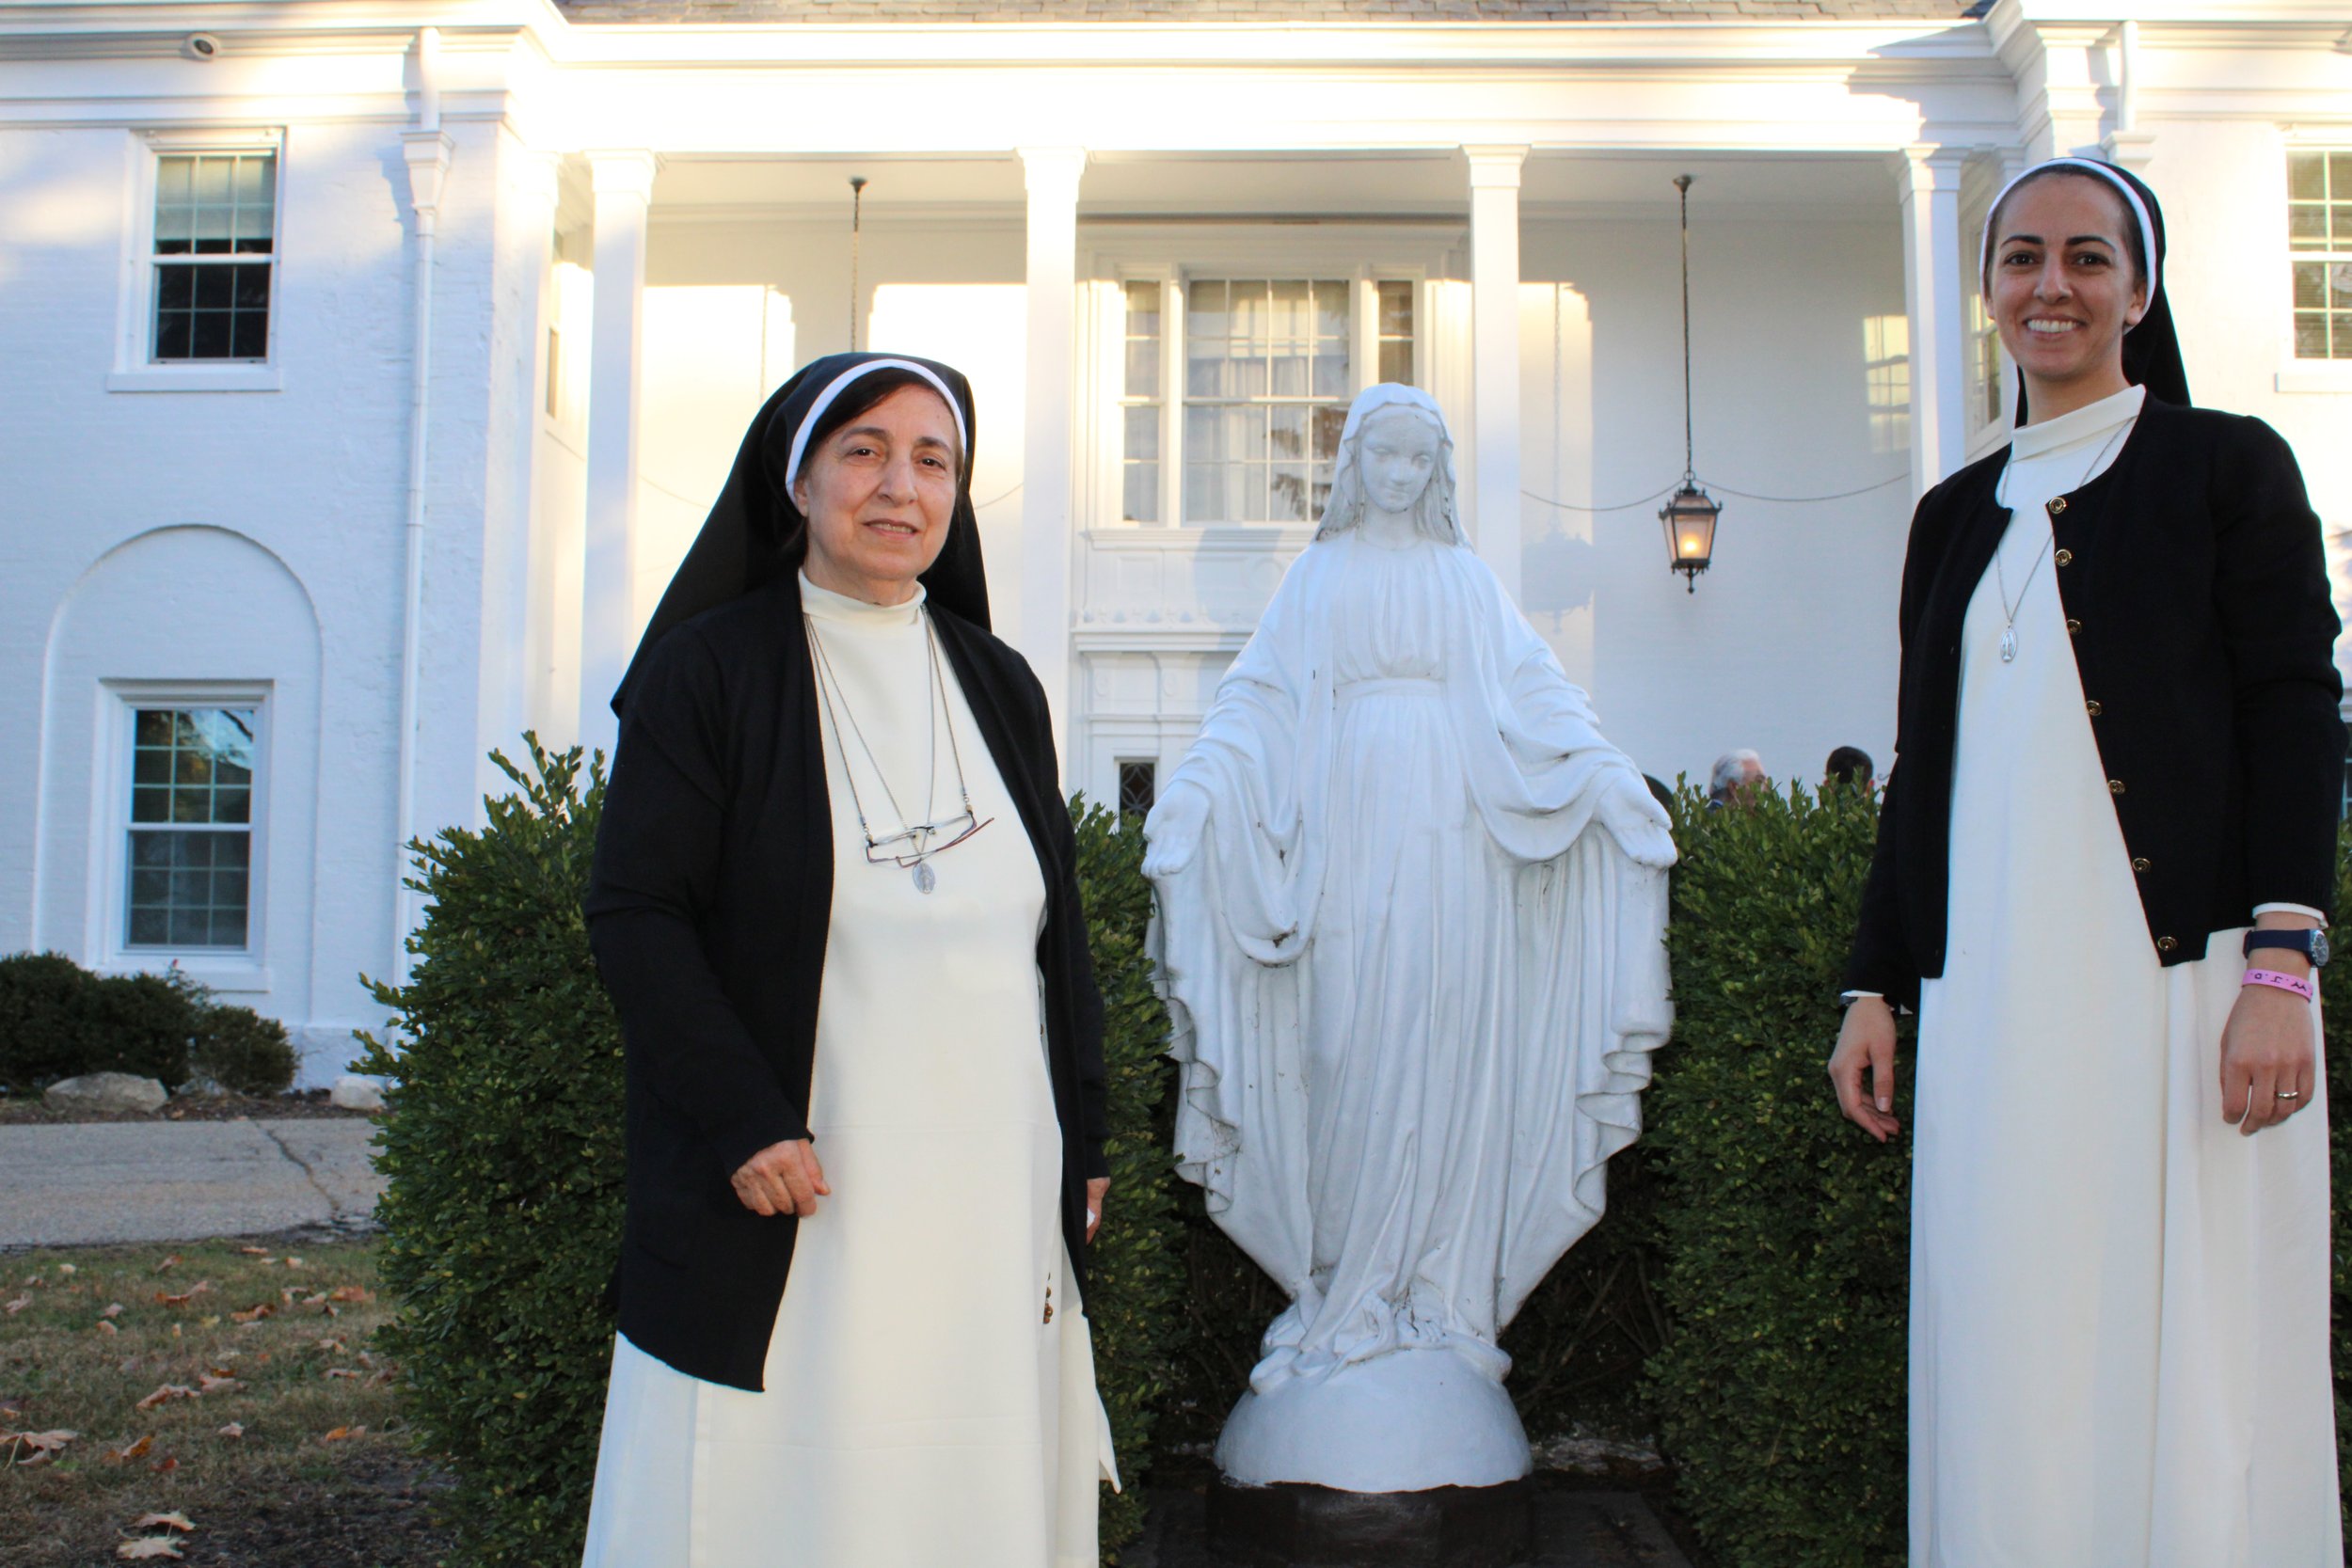  Sr. Ibtihaj Kirma and Sr. Amanda Foumia stand by a statue of the Blessed Mother at the entrance of the retreat center.  